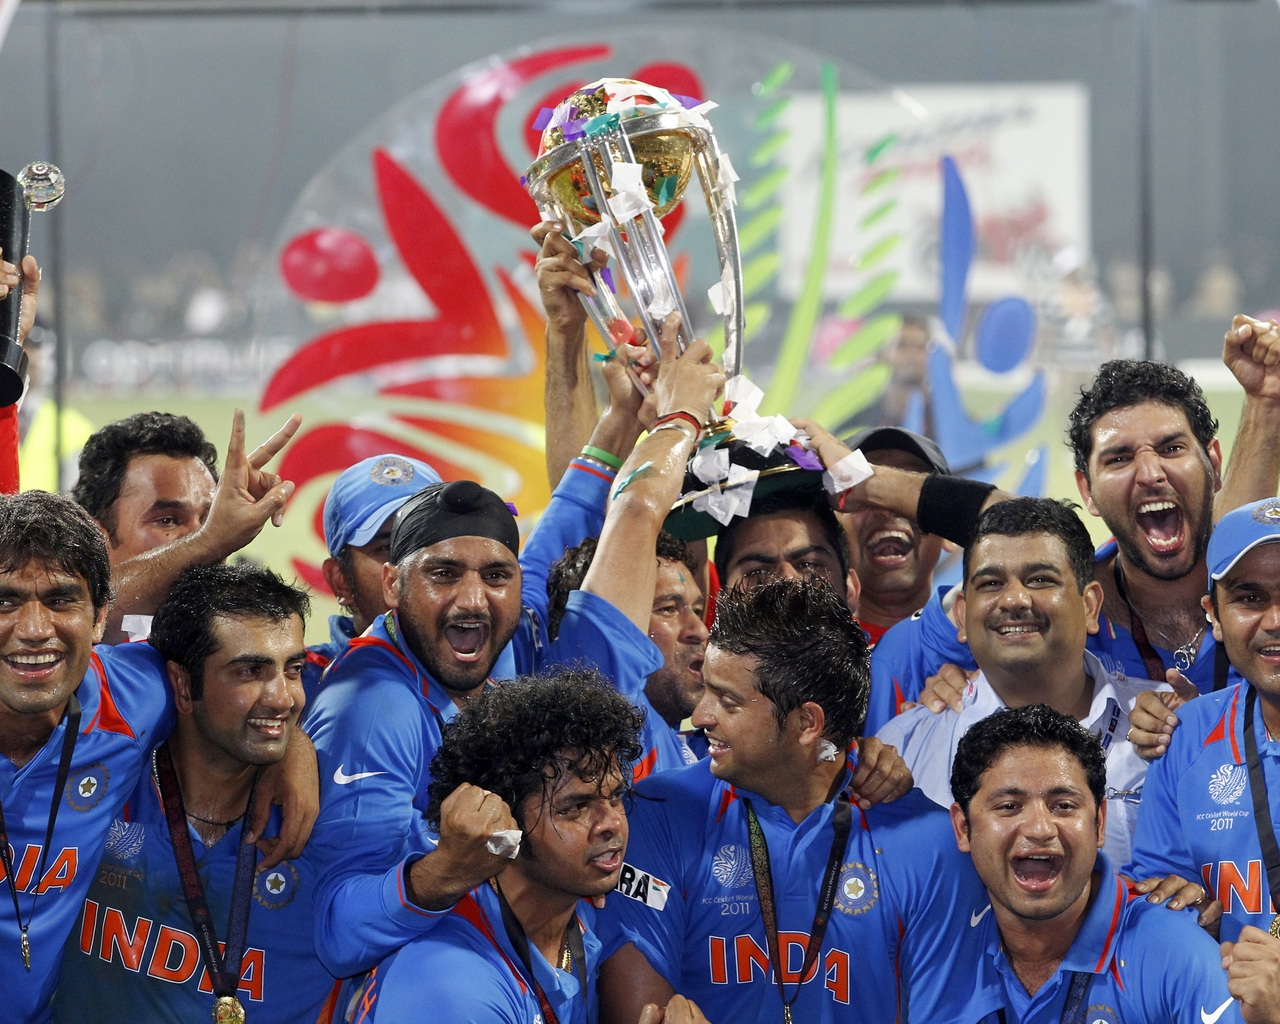 Cricket India Team for 1280 x 1024 resolution